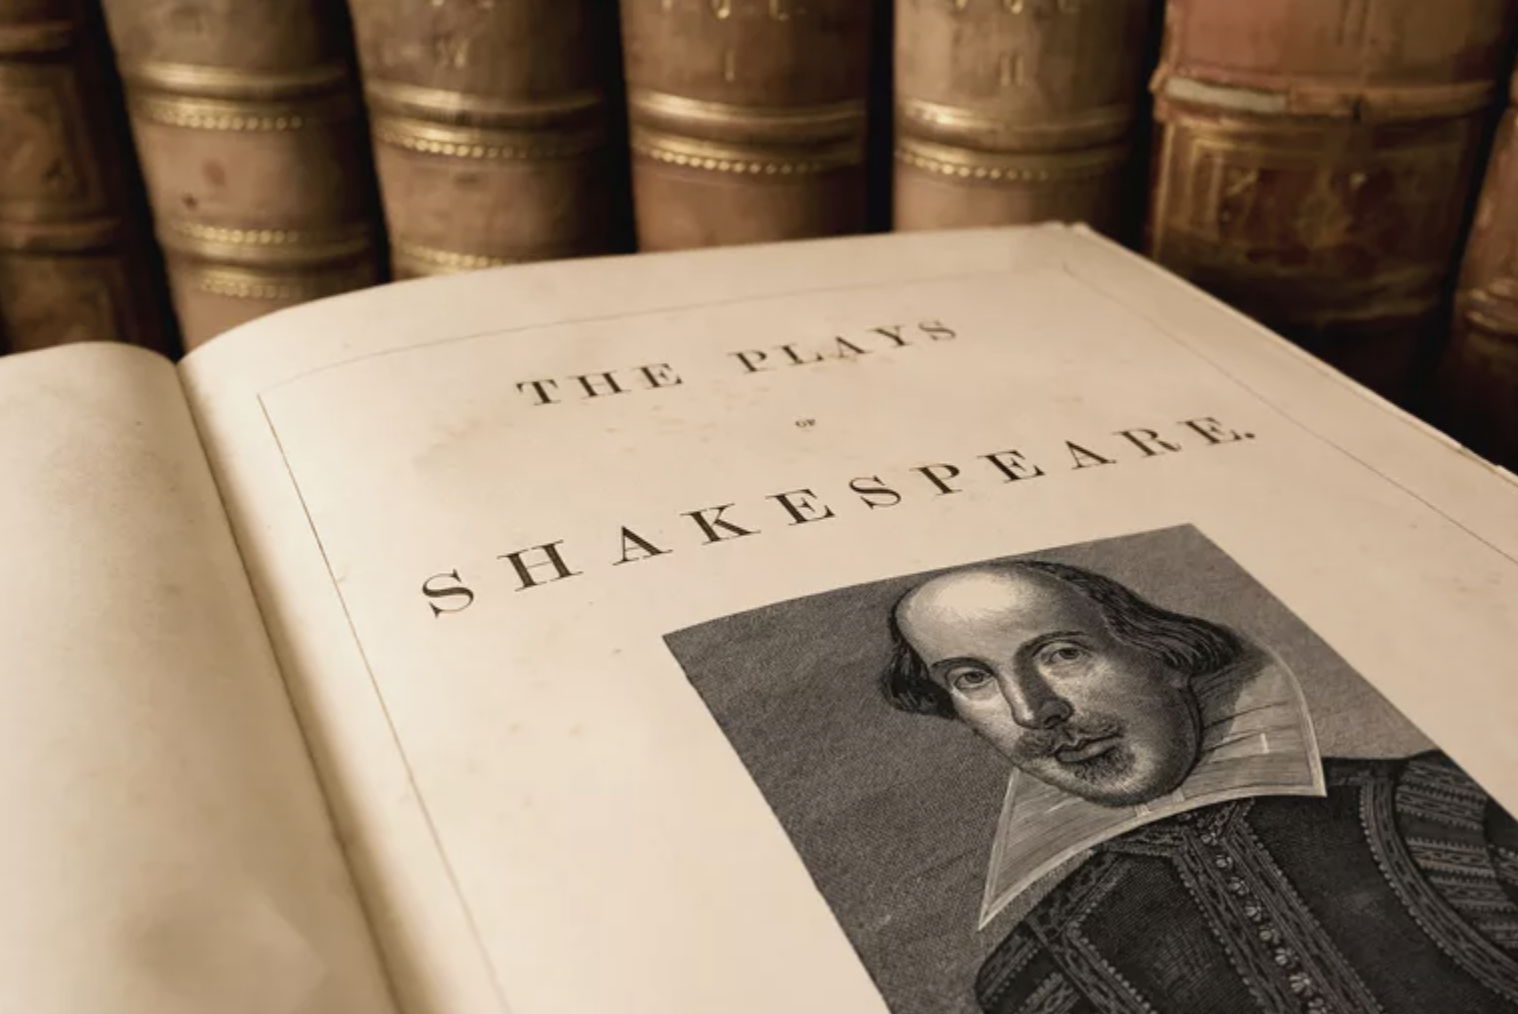 A close up of an open book about The Plays of Shakespeare